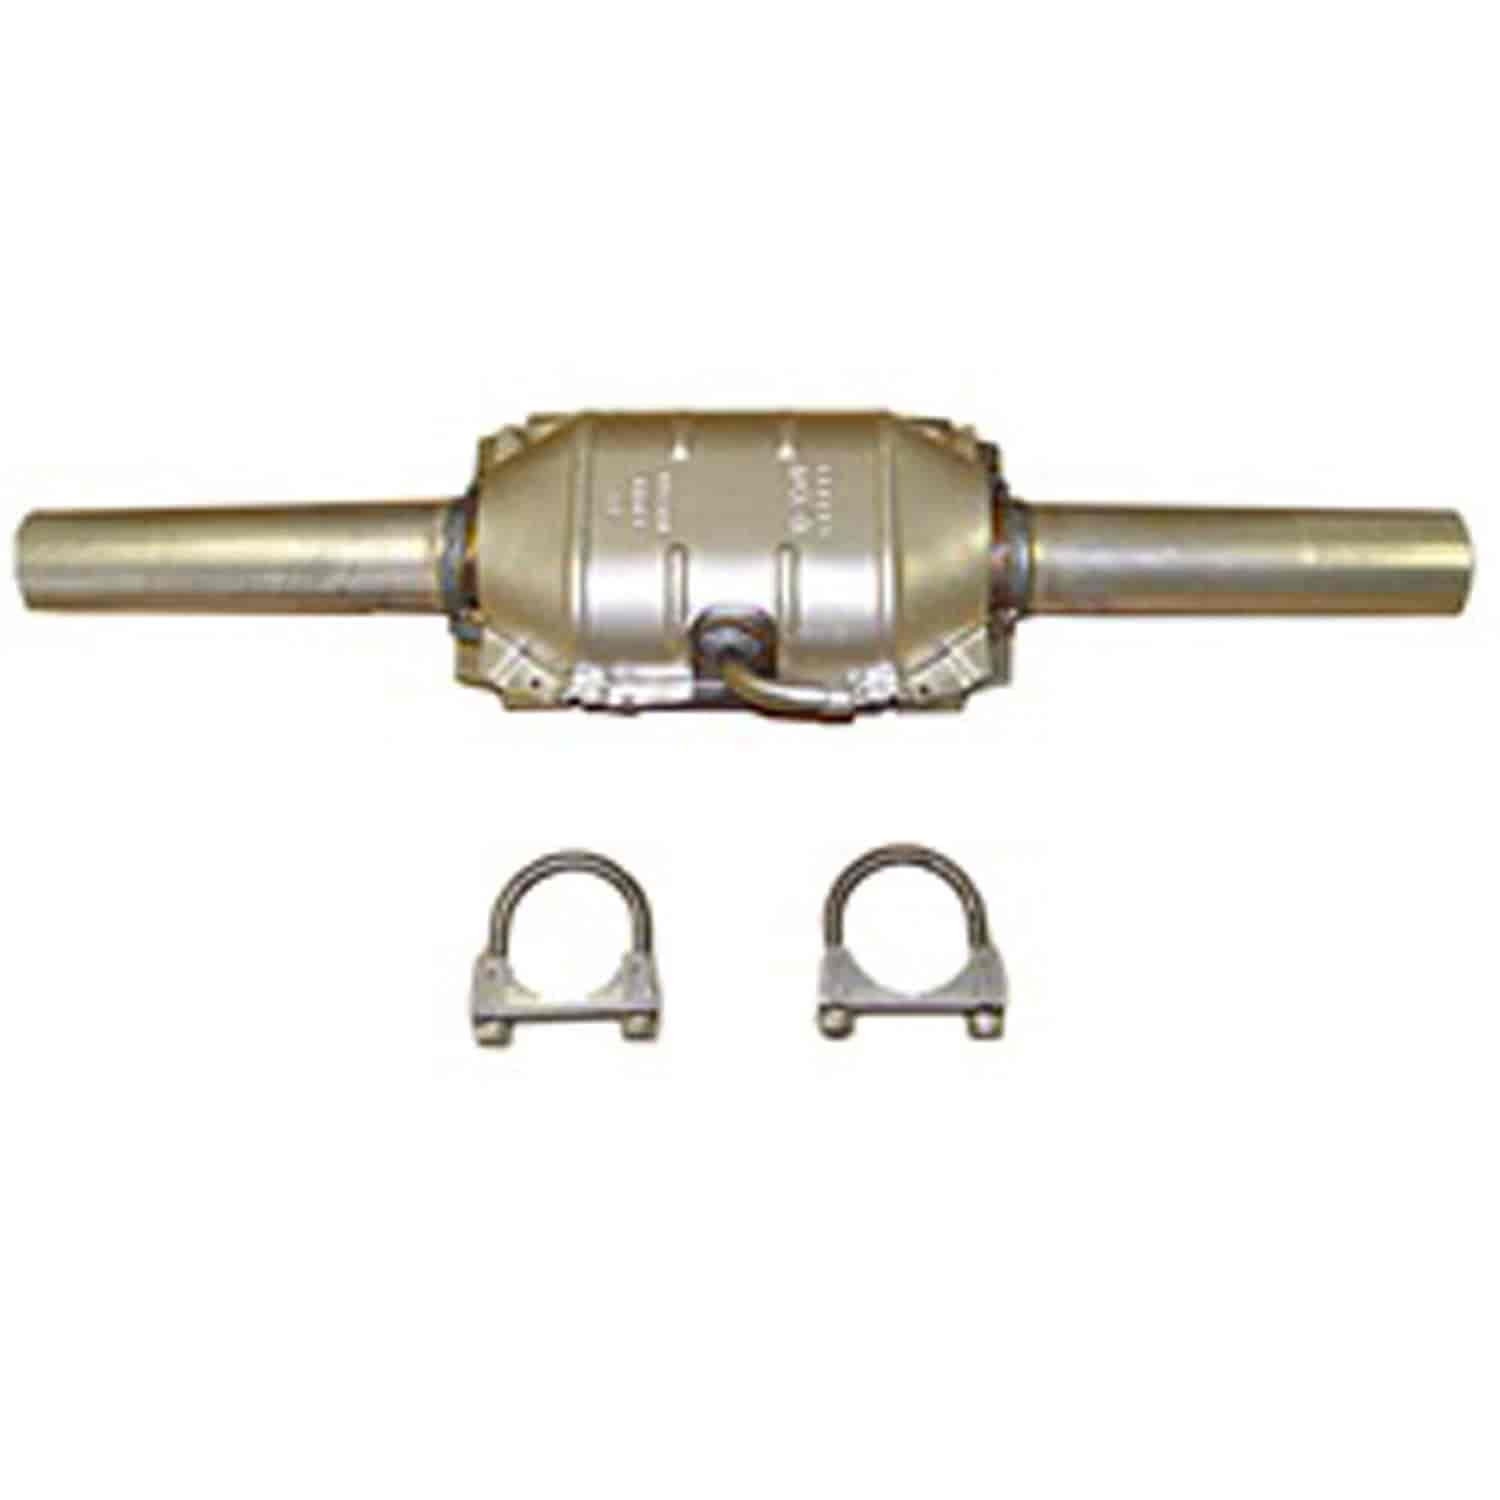 Replacement catalytic converter from Omix-ADA, Fits 81-86 Jeep